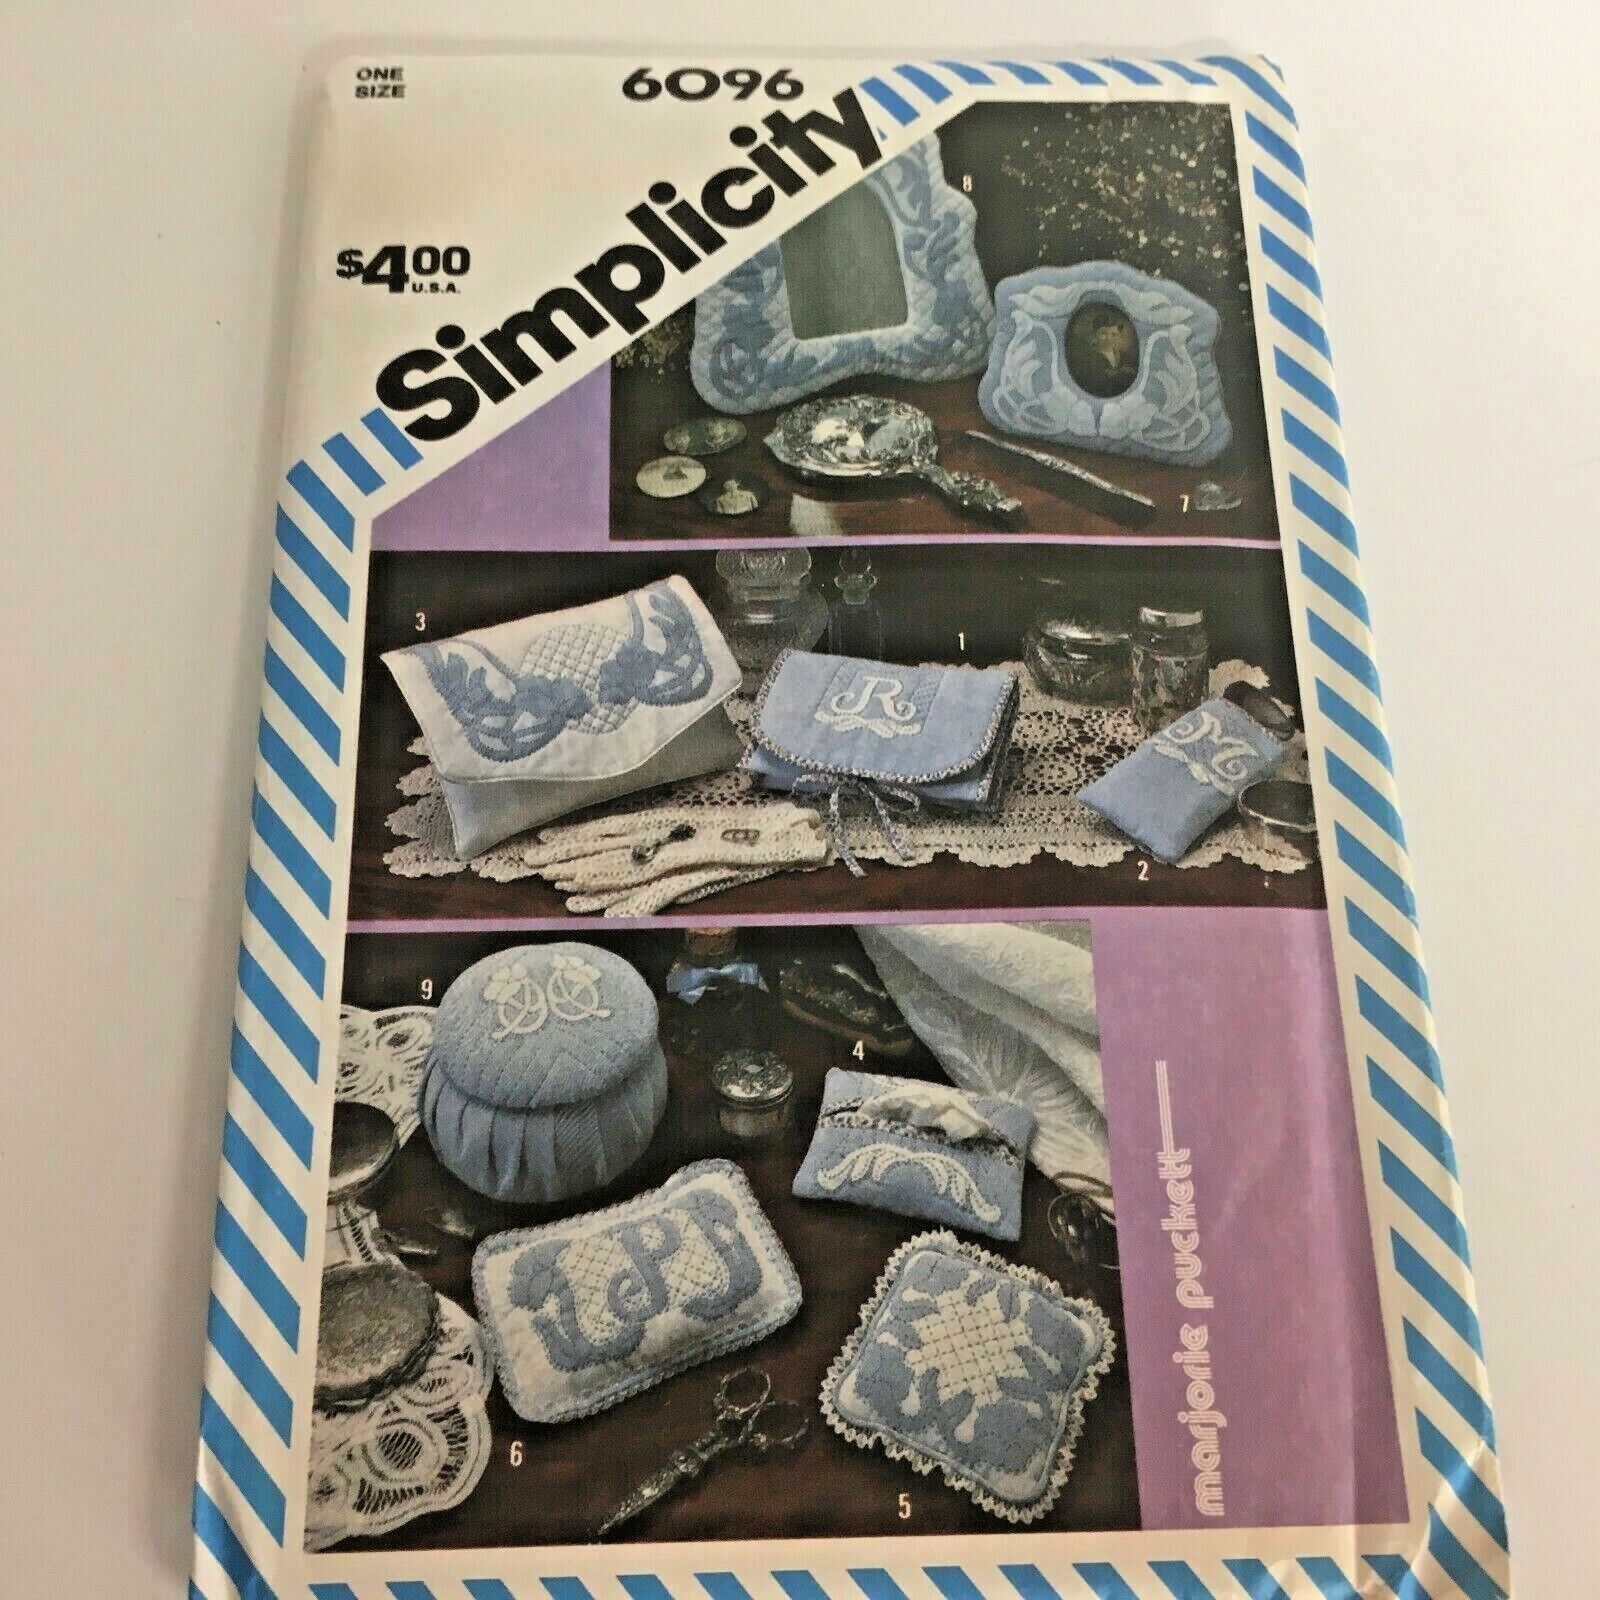 Simplicity Sewing Pattern 6096 Puckett Shadow Quilting Accessories Cosmetic Bag - $10.99